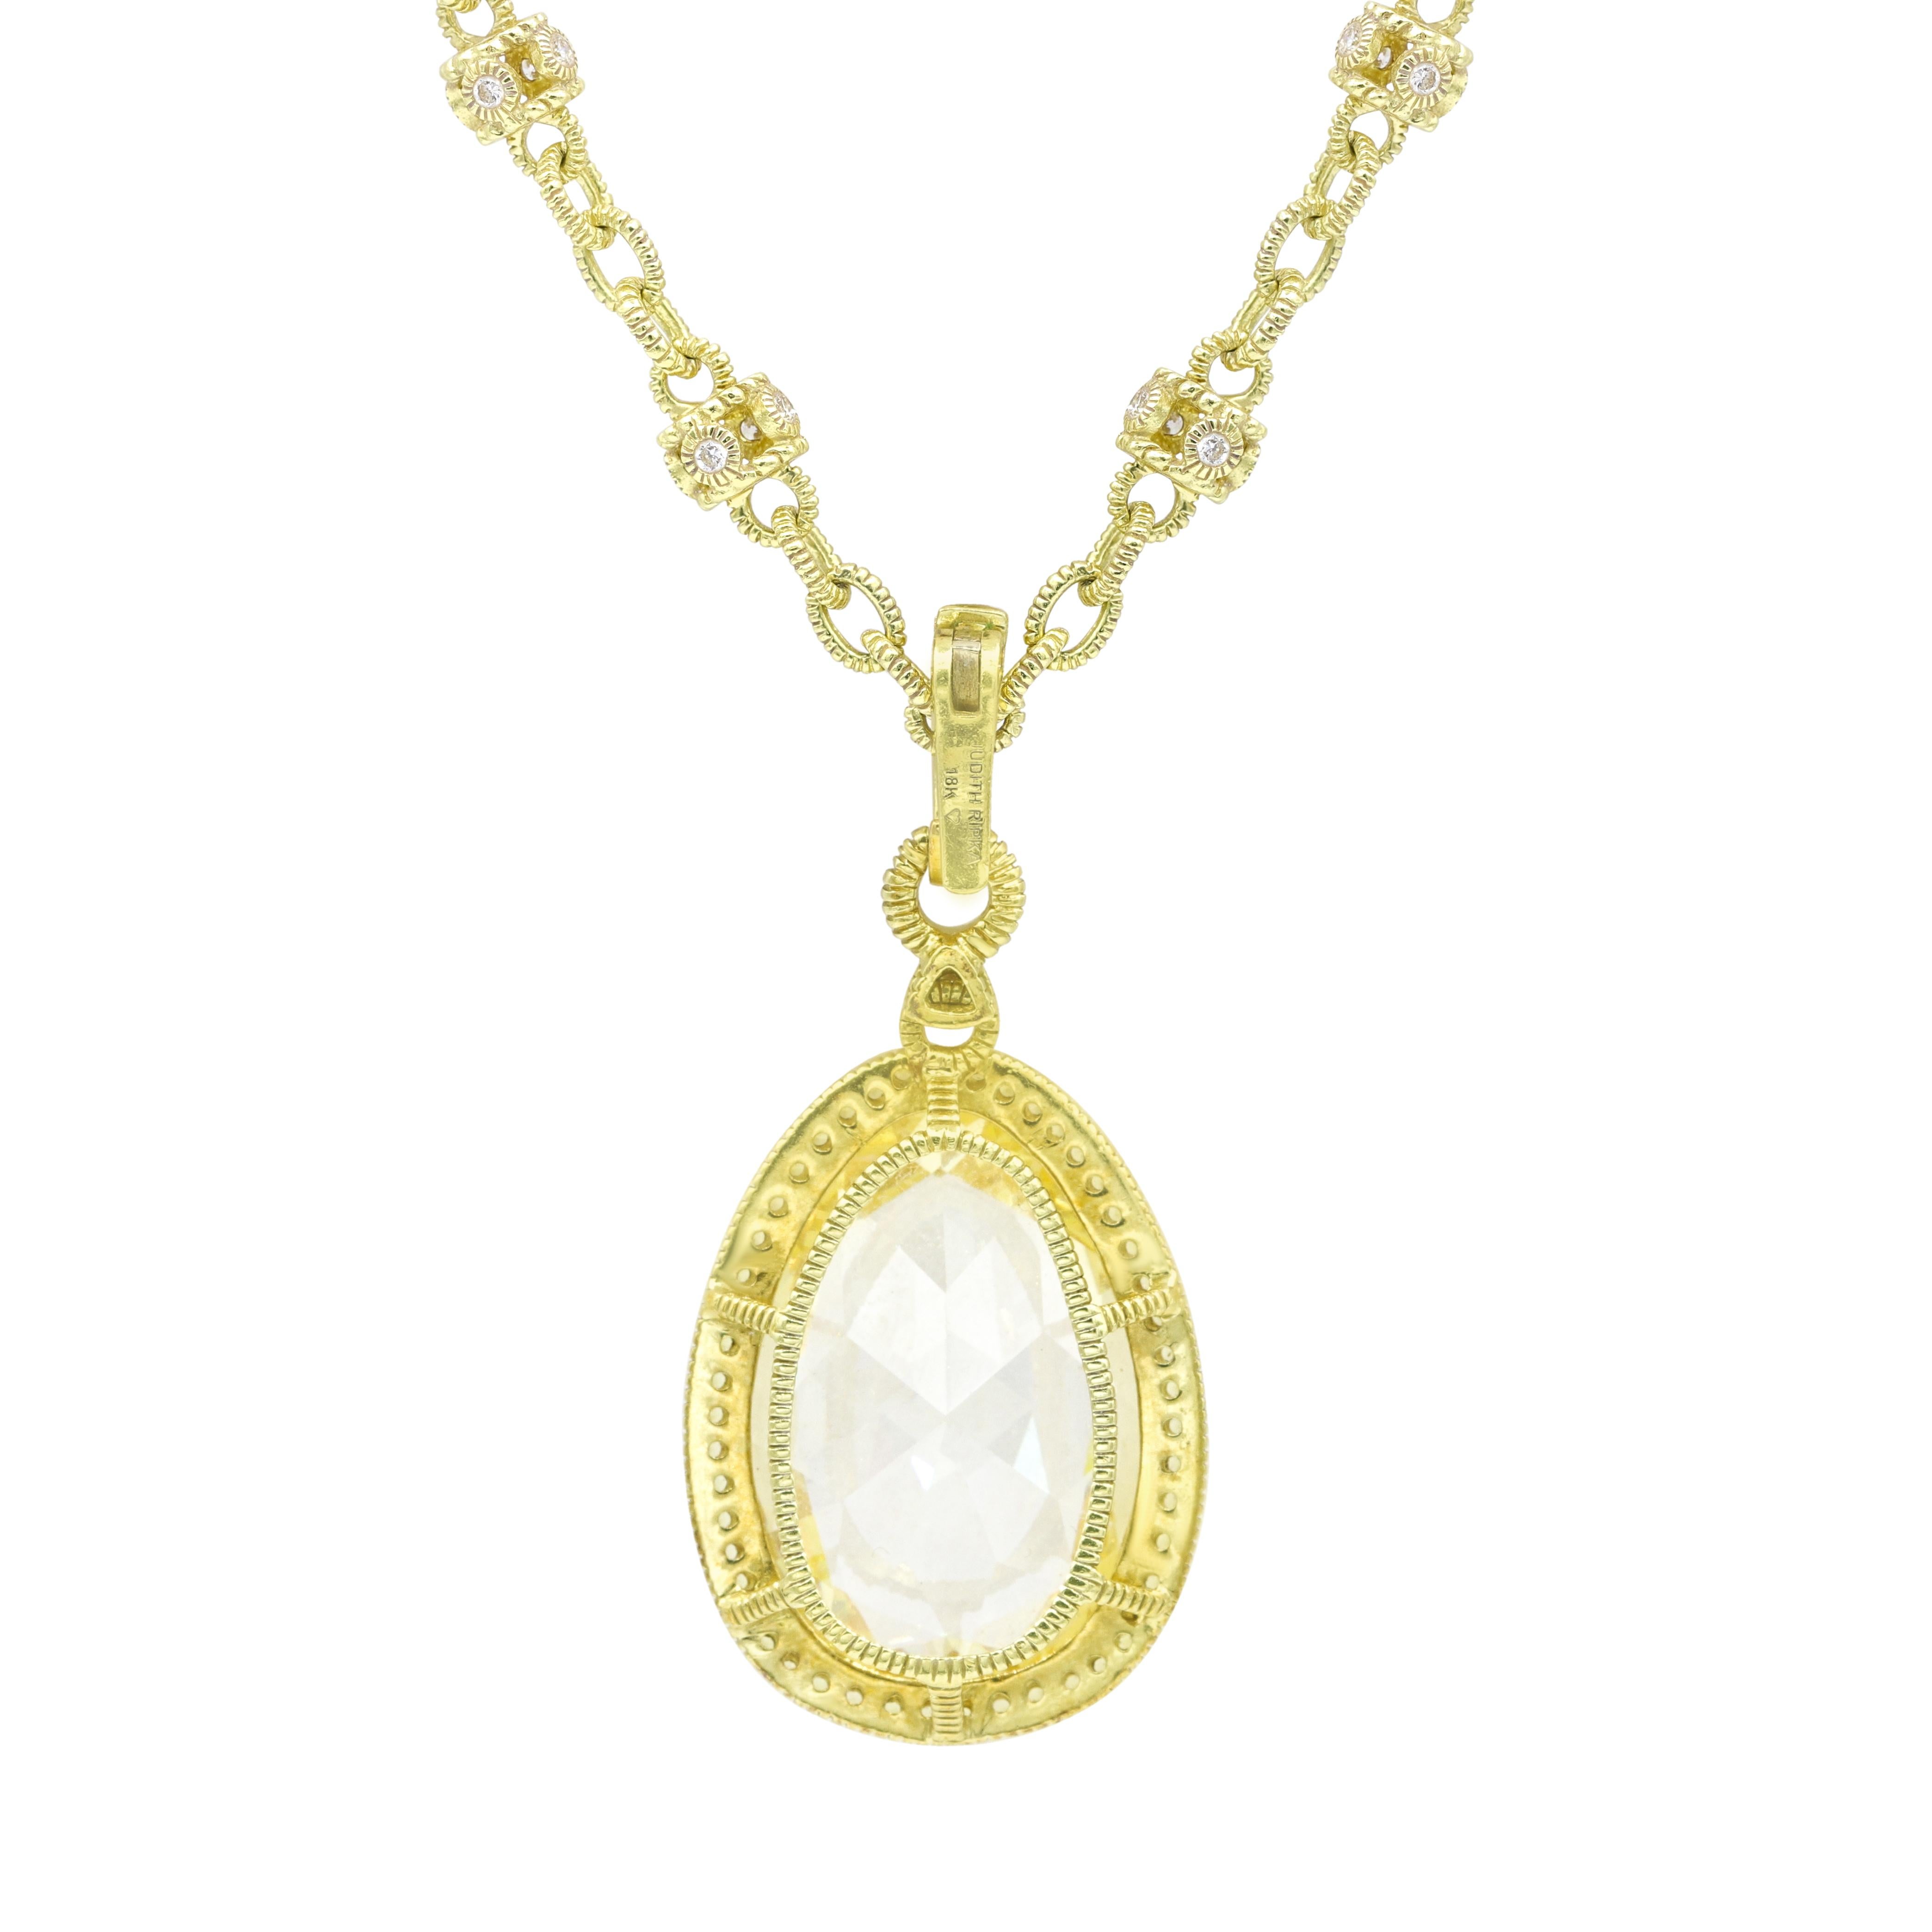 18KT Yellow Gold Citrine, Diamond and Yellow Sapphire Pendant and Diamond Necklace, features 30.00 ct of Oval Citrine, 2.30 ct of Yellow Sapphire on a halo and 1.10 cts of Diamonds.